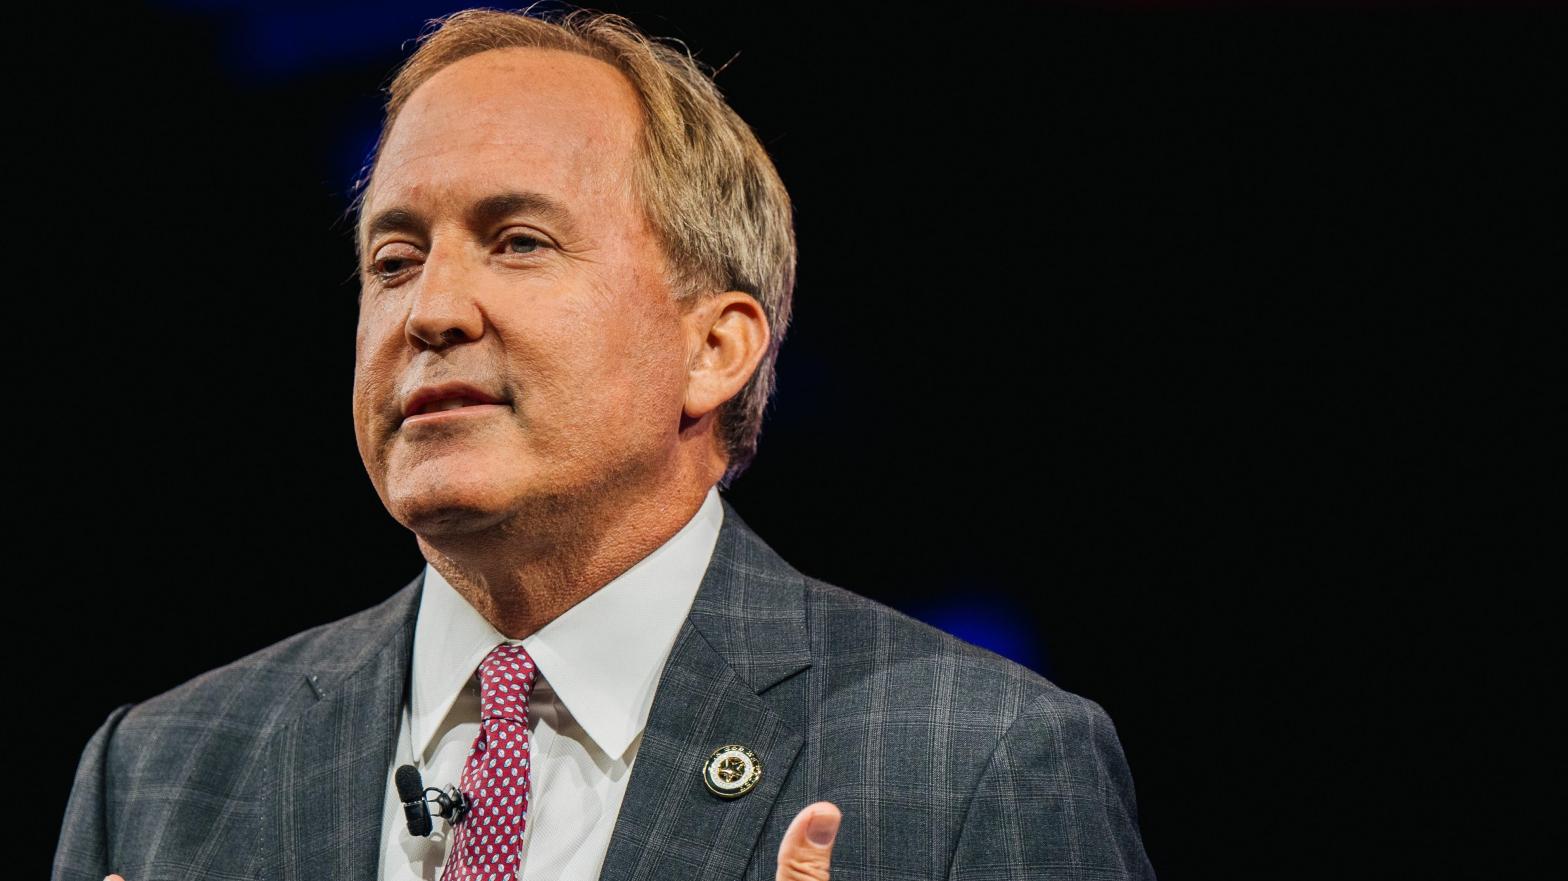 Texas Attorney General Ken Paxton often uses his office like a battering ram and bullhorn, decrying the excesses of big tech while rarely doing much individually to rein in industry excesses. (Photo: Brandon Bell, Getty Images)